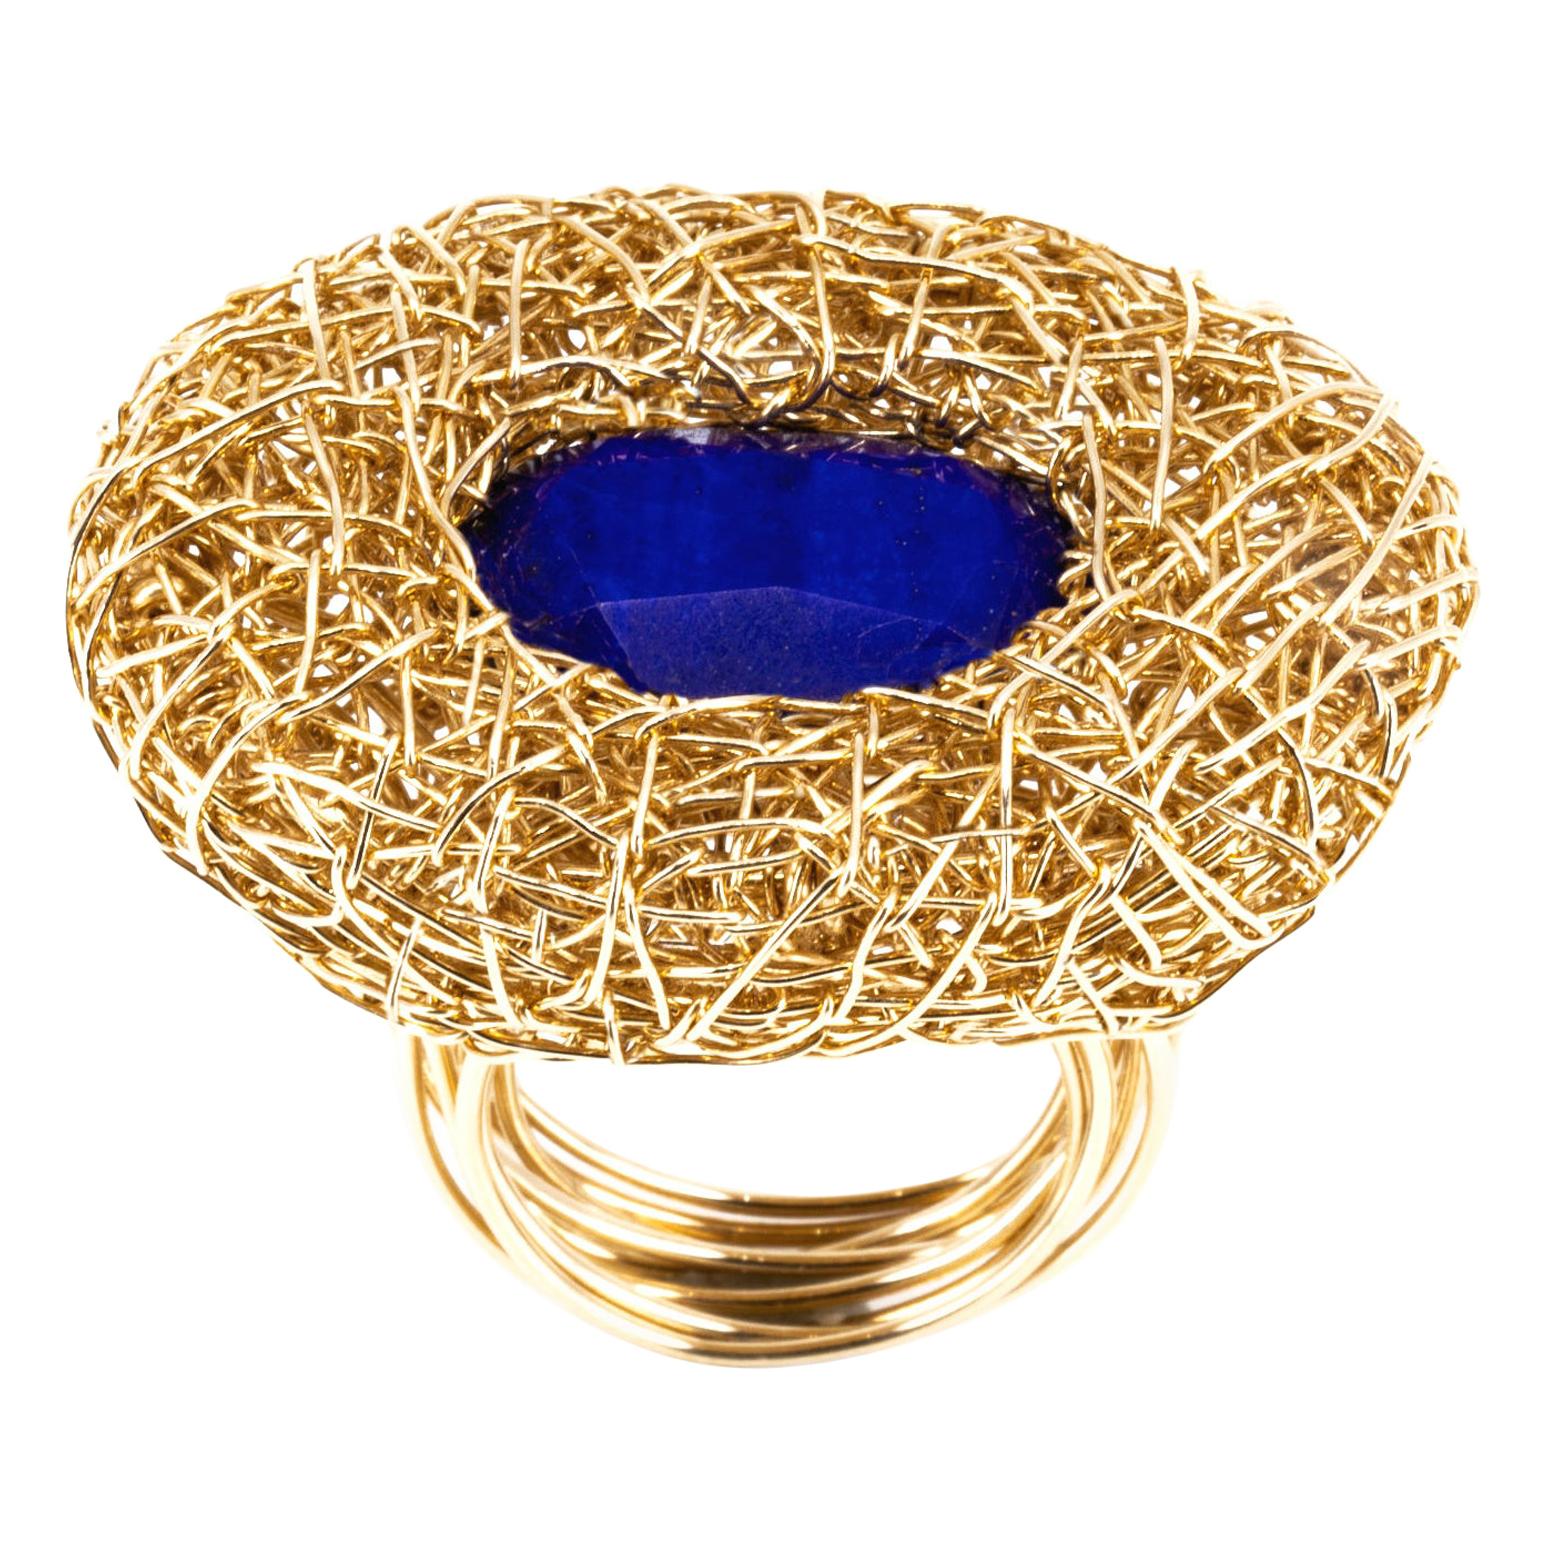 Super Blue Lapis Lazuli 14 k Gold F Woven Contemporary Cocktail Ring by Artist 1